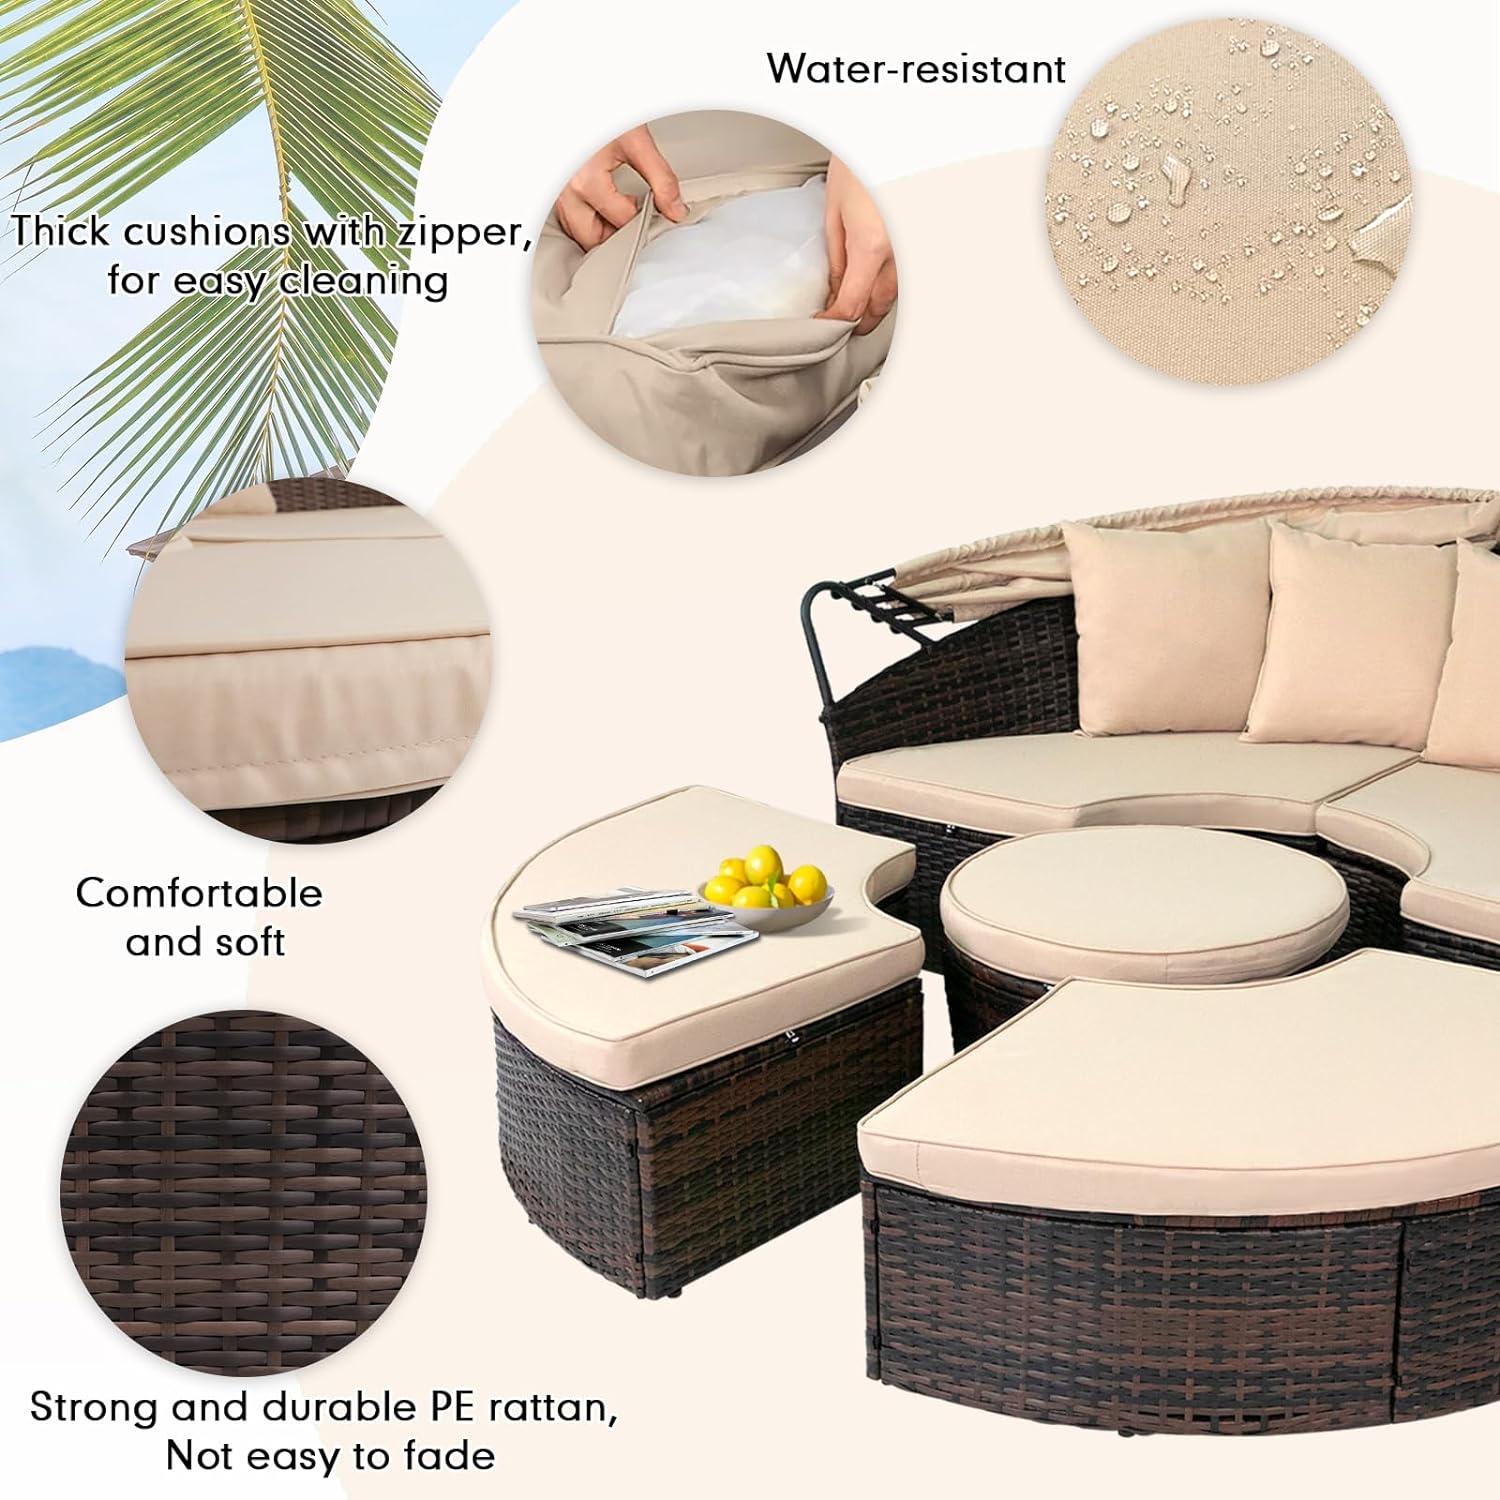 SYNGAR 6 Pieces Outdoor Sunbed Daybed Set with Canopy, Patio Rattan Sectional Furniture Set with Coffee Table, Cushioned Wicker Conversation Sofa Set for Backyard, Deck, Poolside, Garden, Beige, D6308 - image 4 of 10